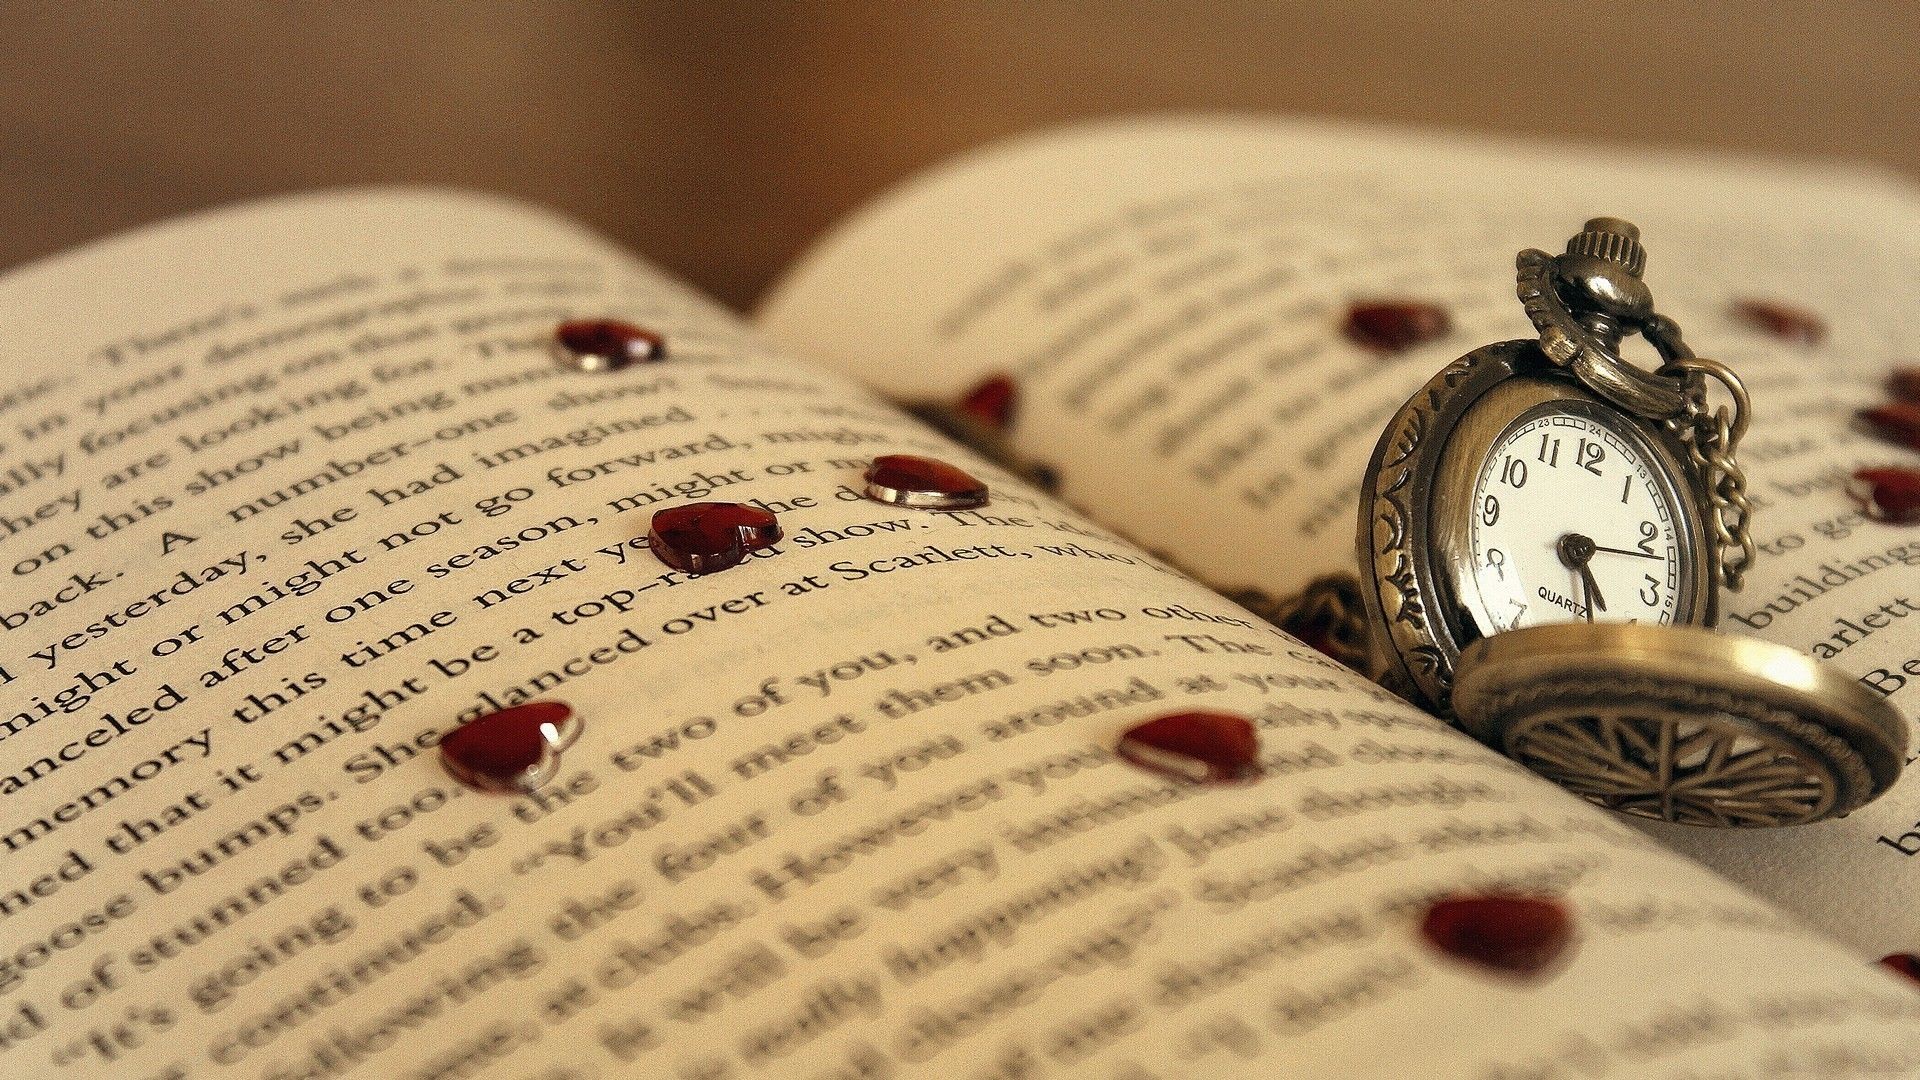 Love With Books - HD Wallpaper 